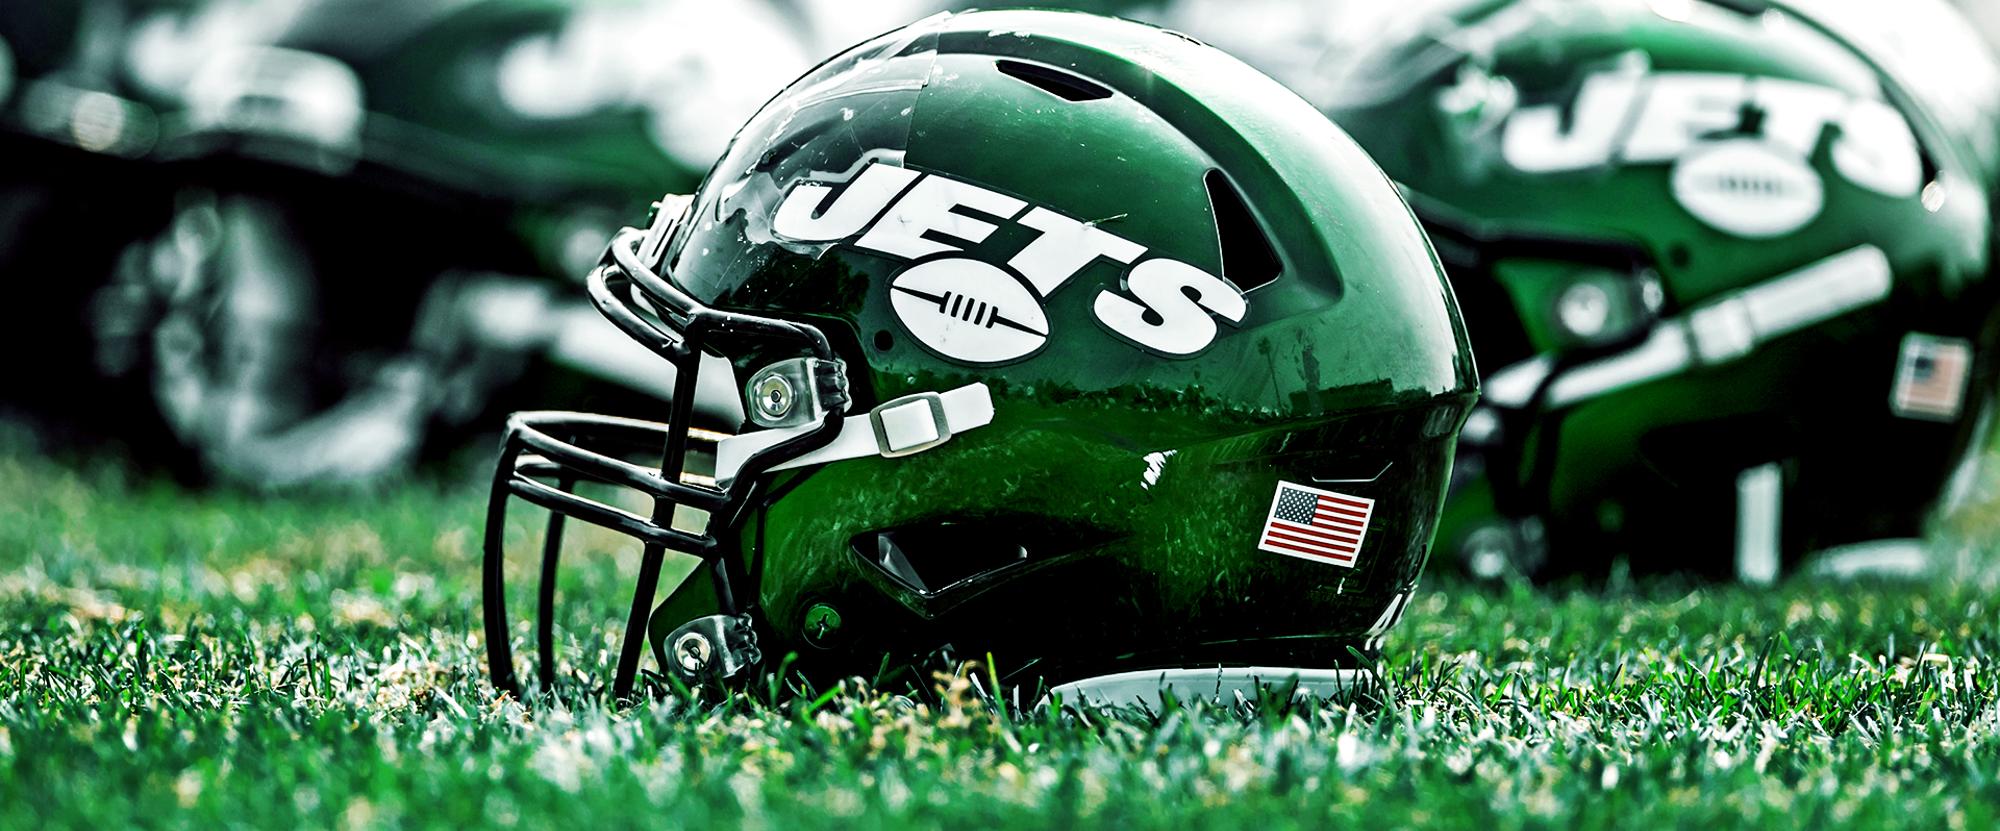 Los Angeles Chargers @ New York Jets